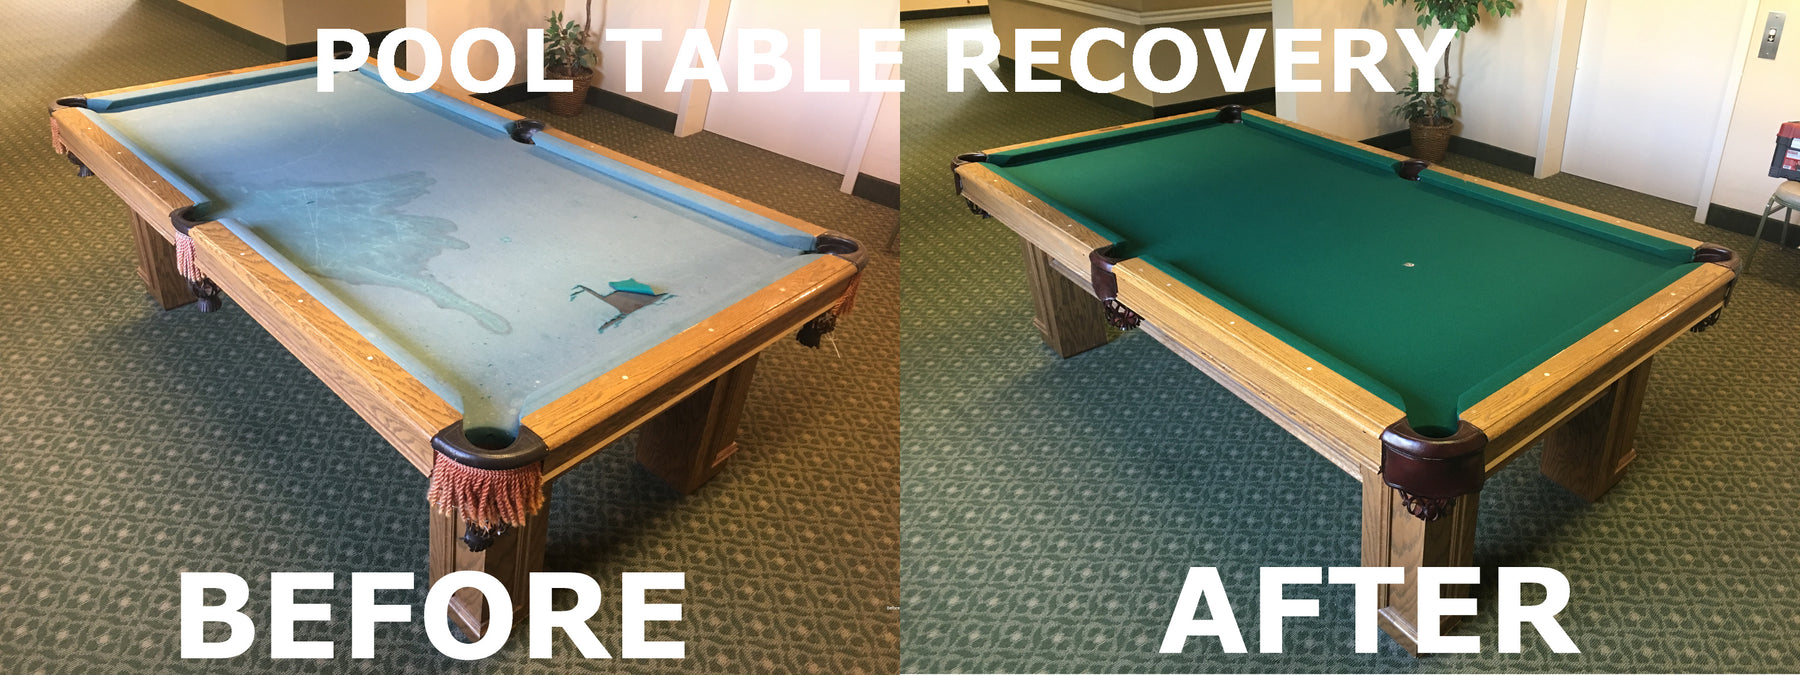 Recover Pool Table